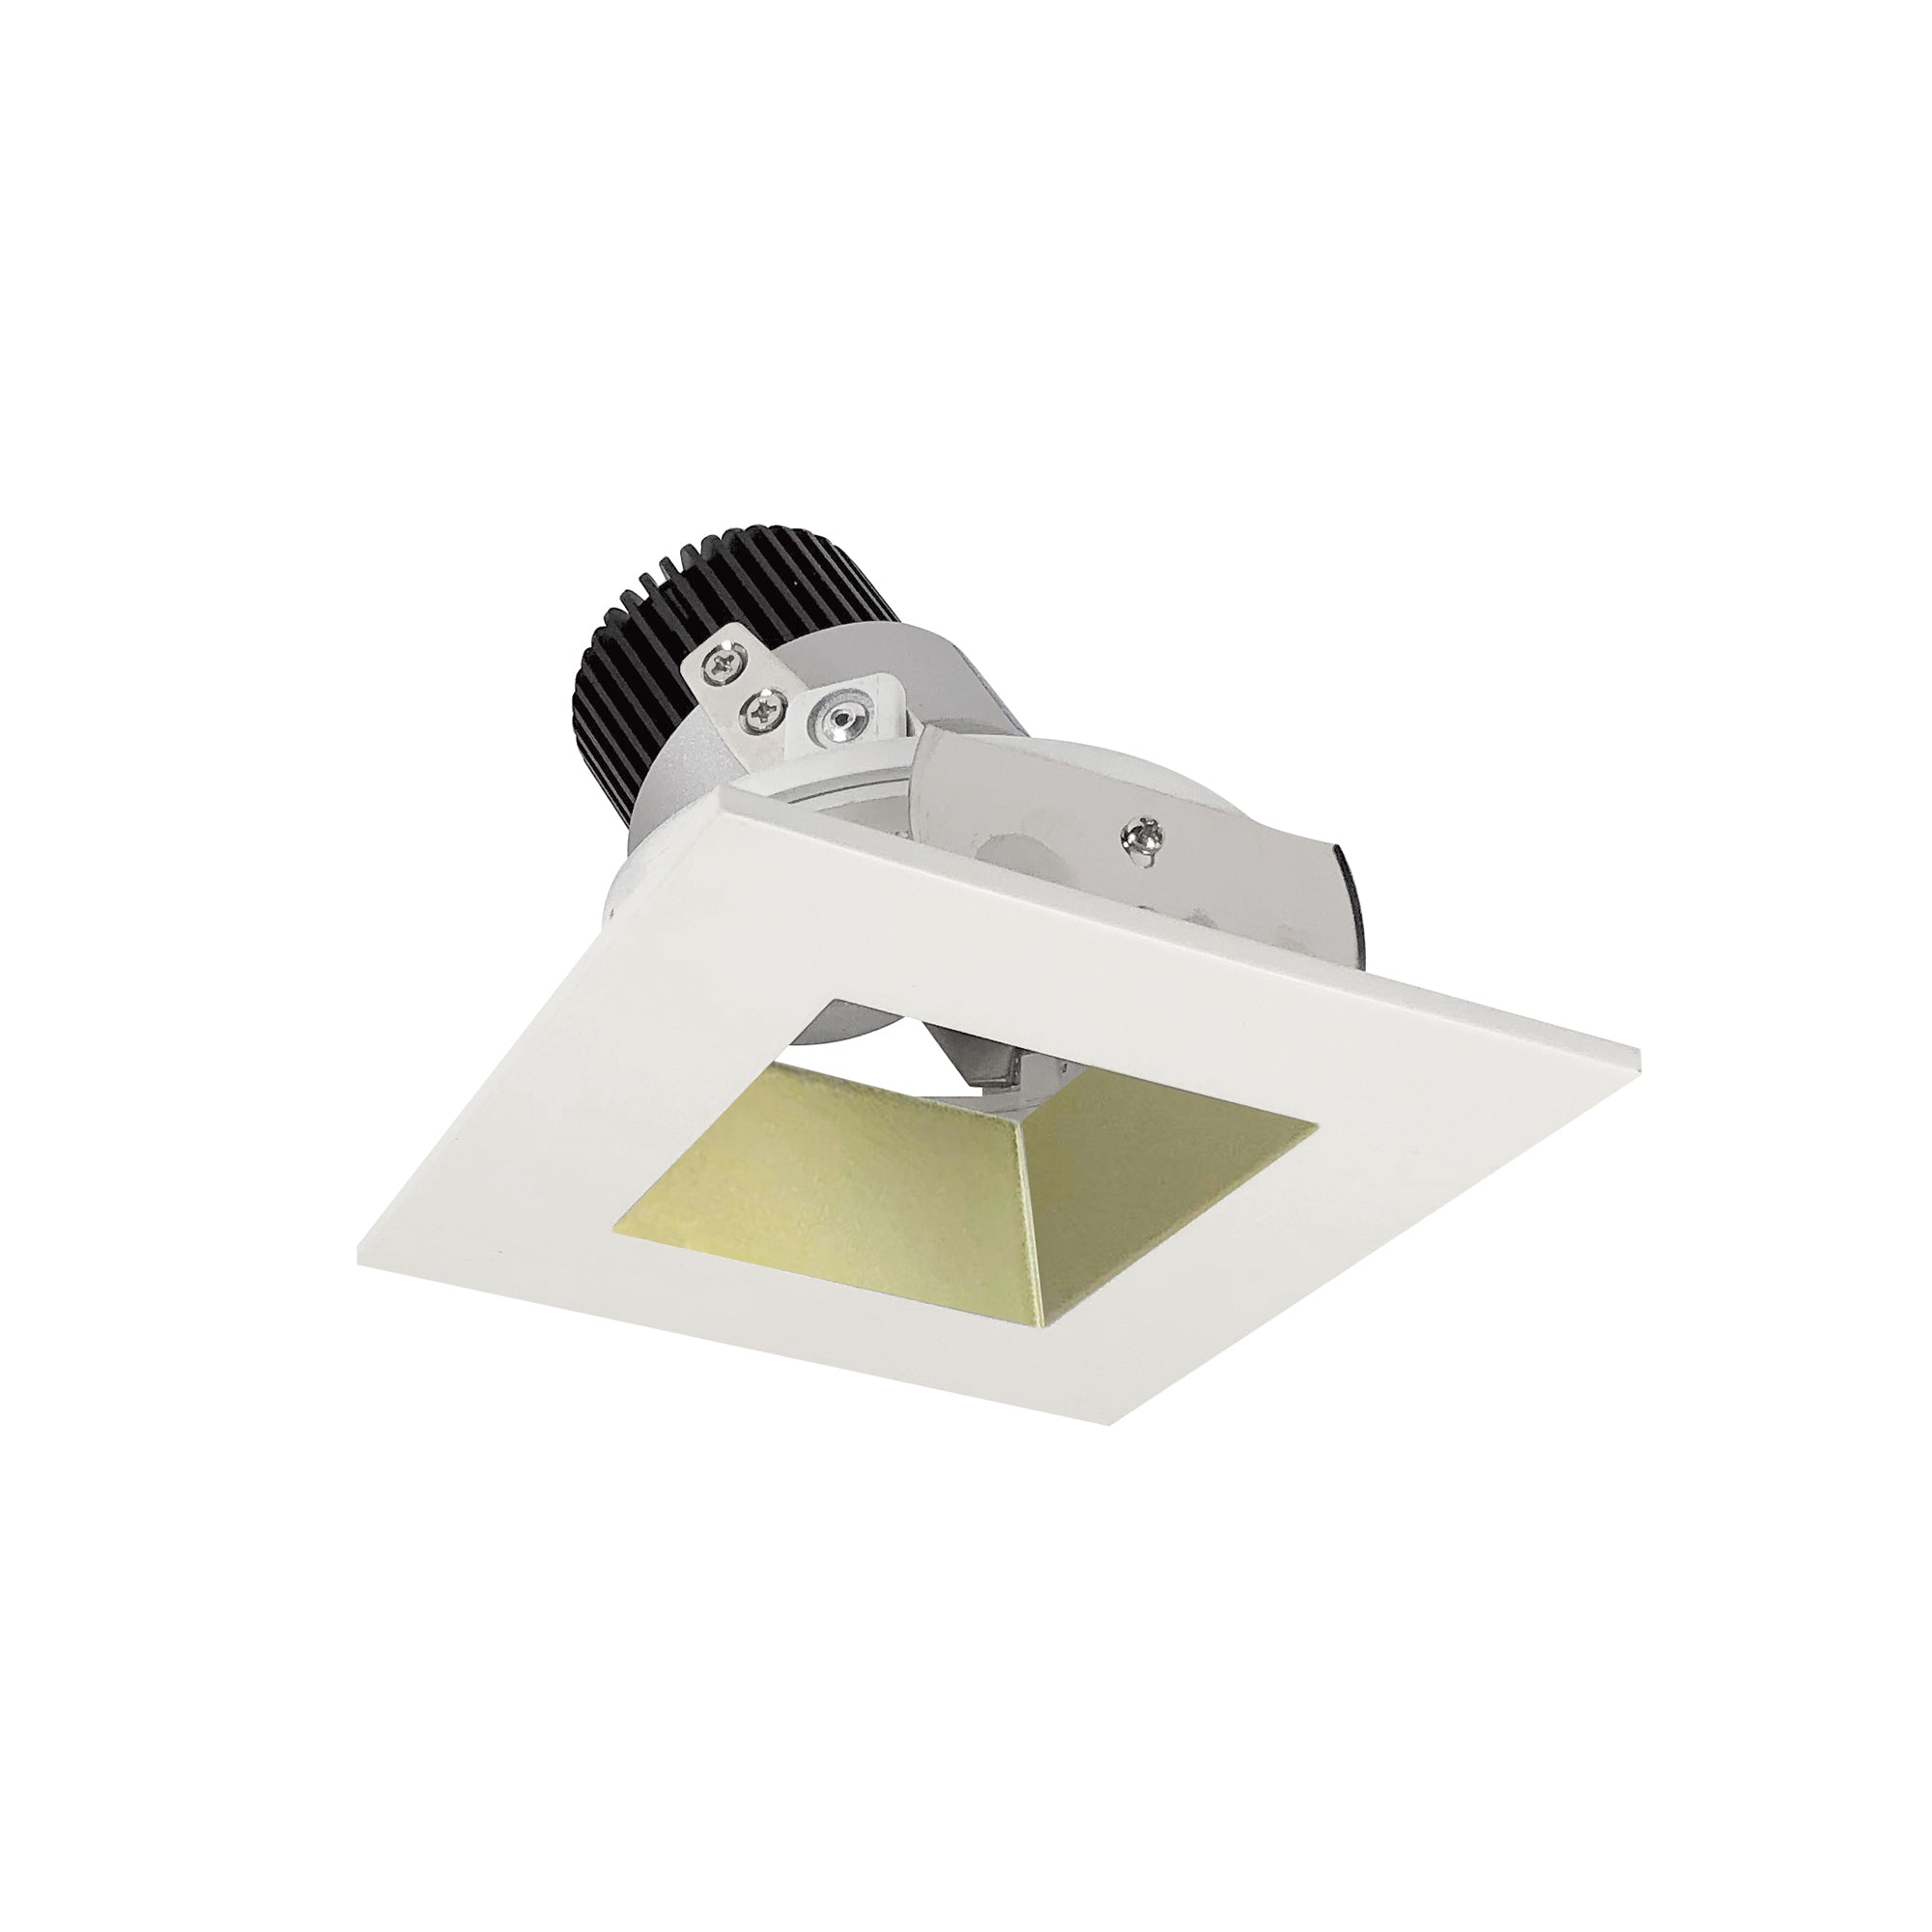 Nora Lighting NIO-4SDSQ27XCHMPW/10 4" Iolite LED Square Adjustable Reflector With Square Aperture, 1000lm / 14W, 2700K - Champagne Haze Reflector / Matte Powder White Flange